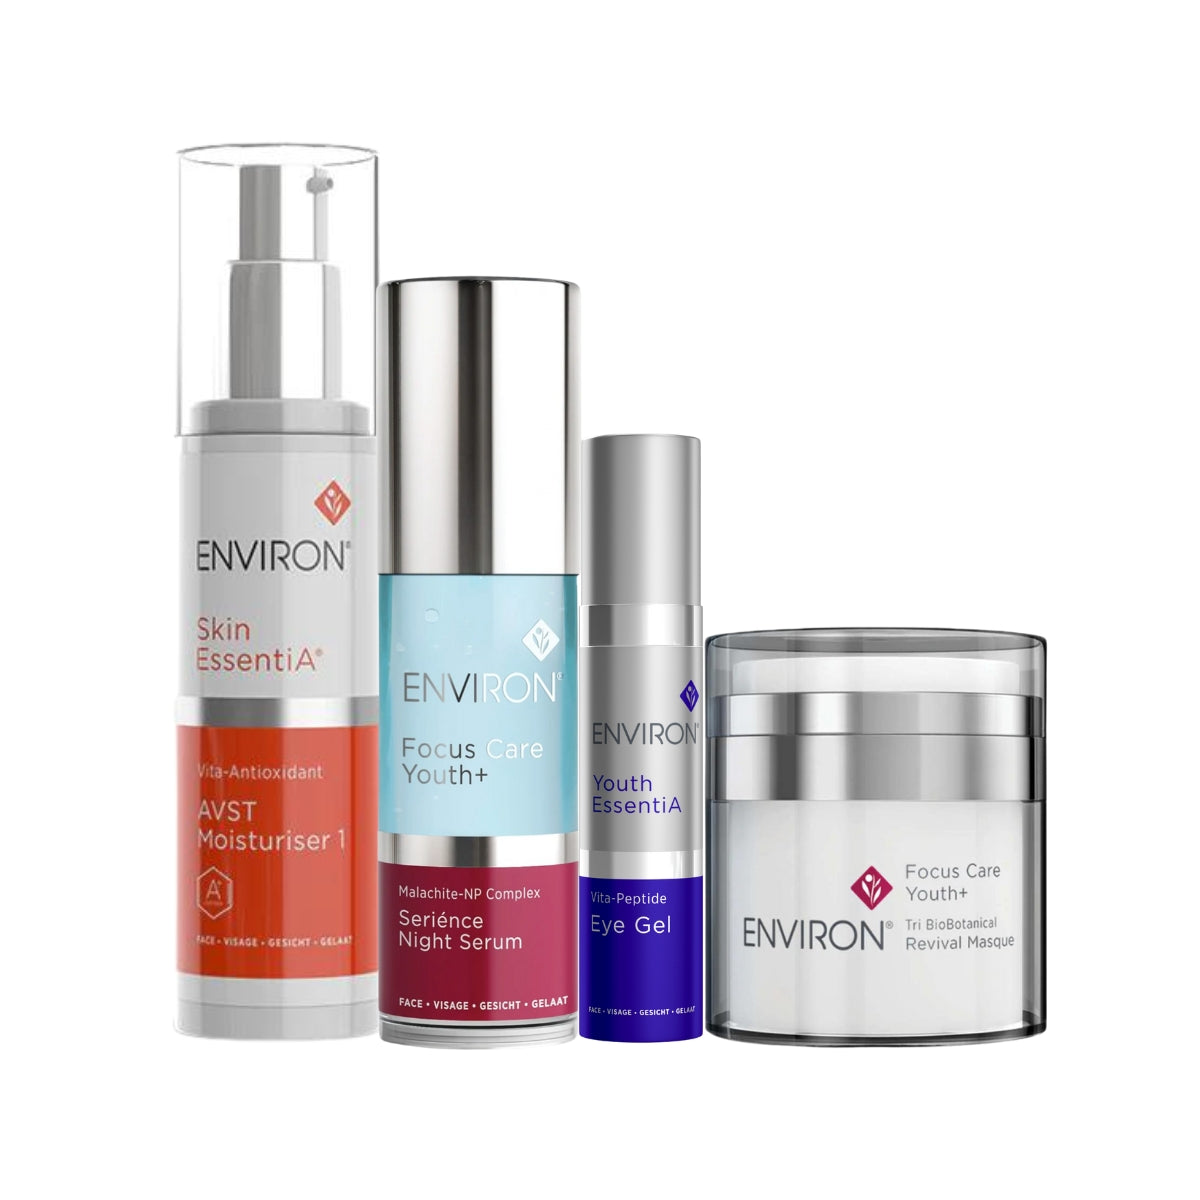 Environ Smooth and Brighten Bundle with Complimentary Serience Night Serum